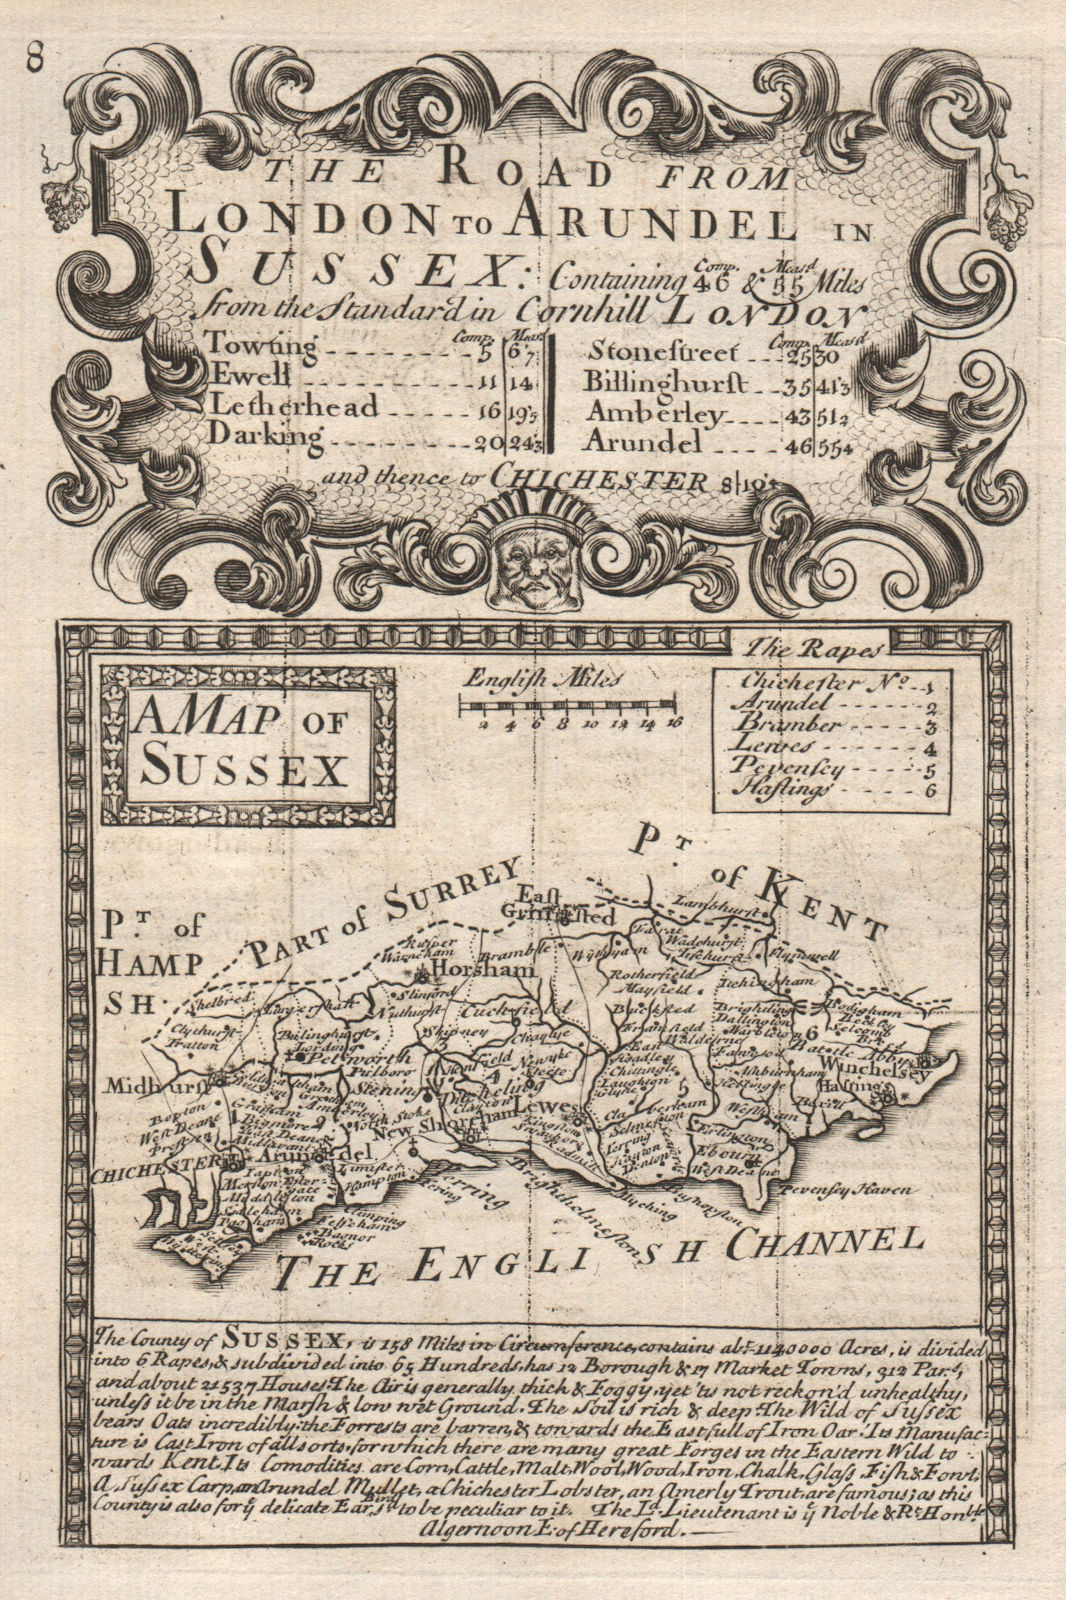 Associate Product 'A Map of Sussex'. County map by J. OWEN & E. BOWEN 1753 old antique chart